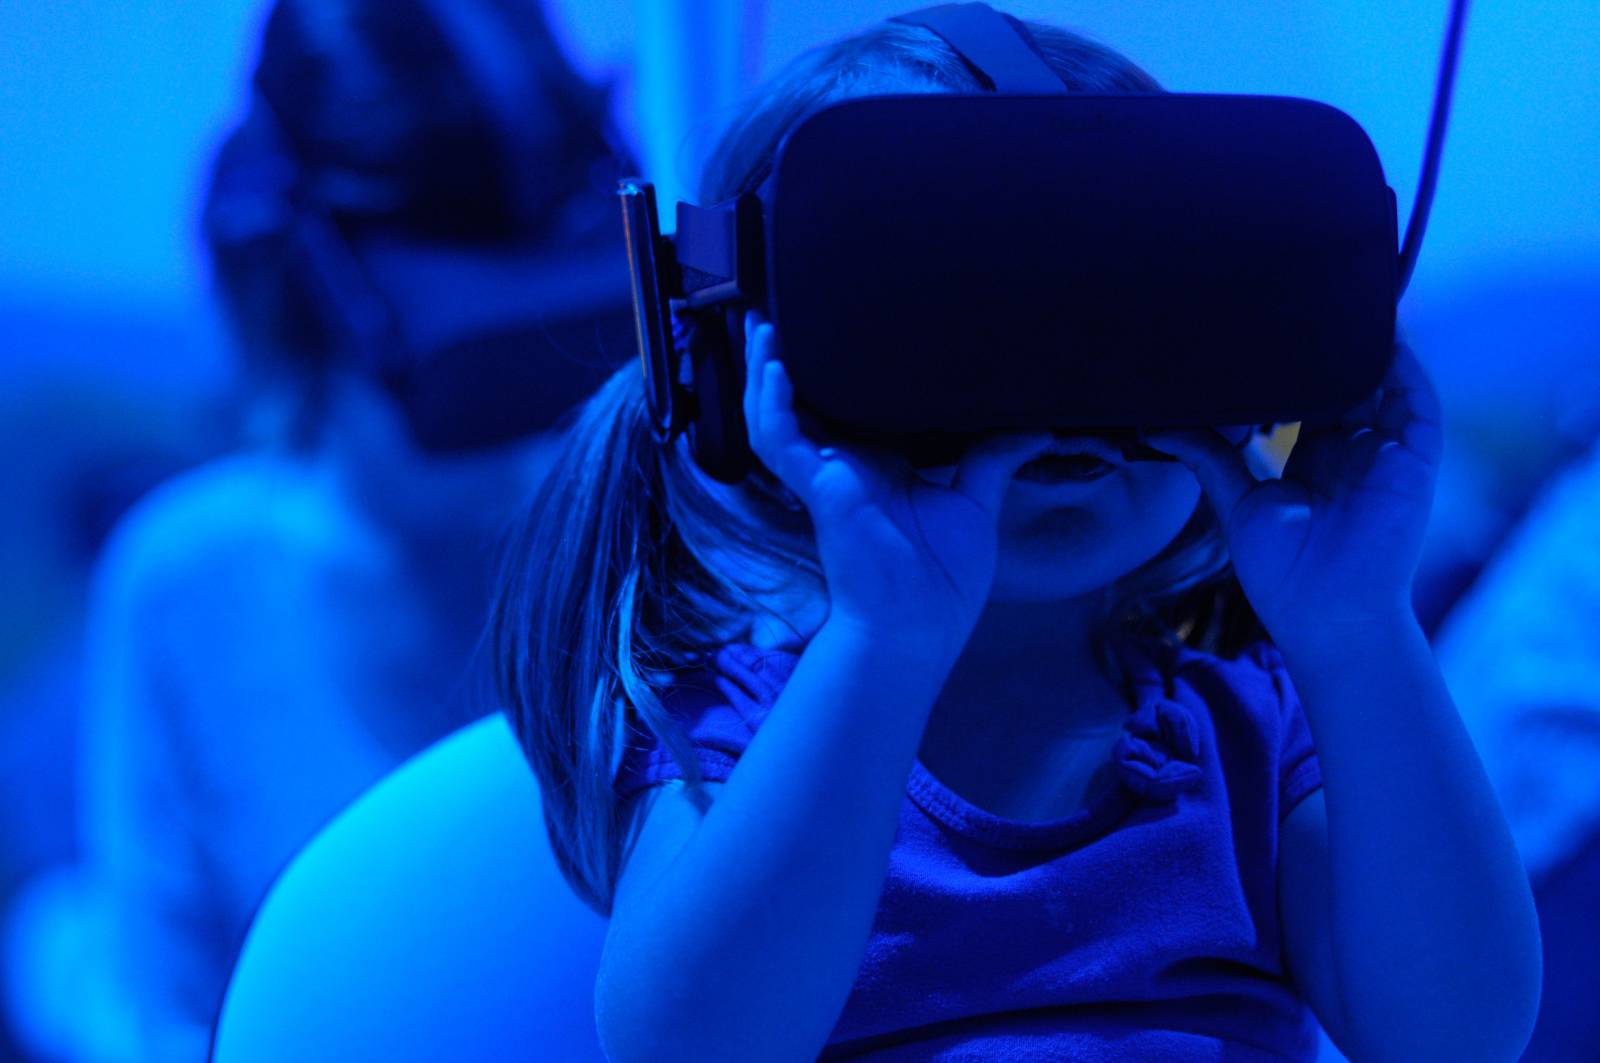 A young child with a Virtual Reality headset, clutching the mask with both their hands. Another child sits behind also wearing a Virtual Reality headset.